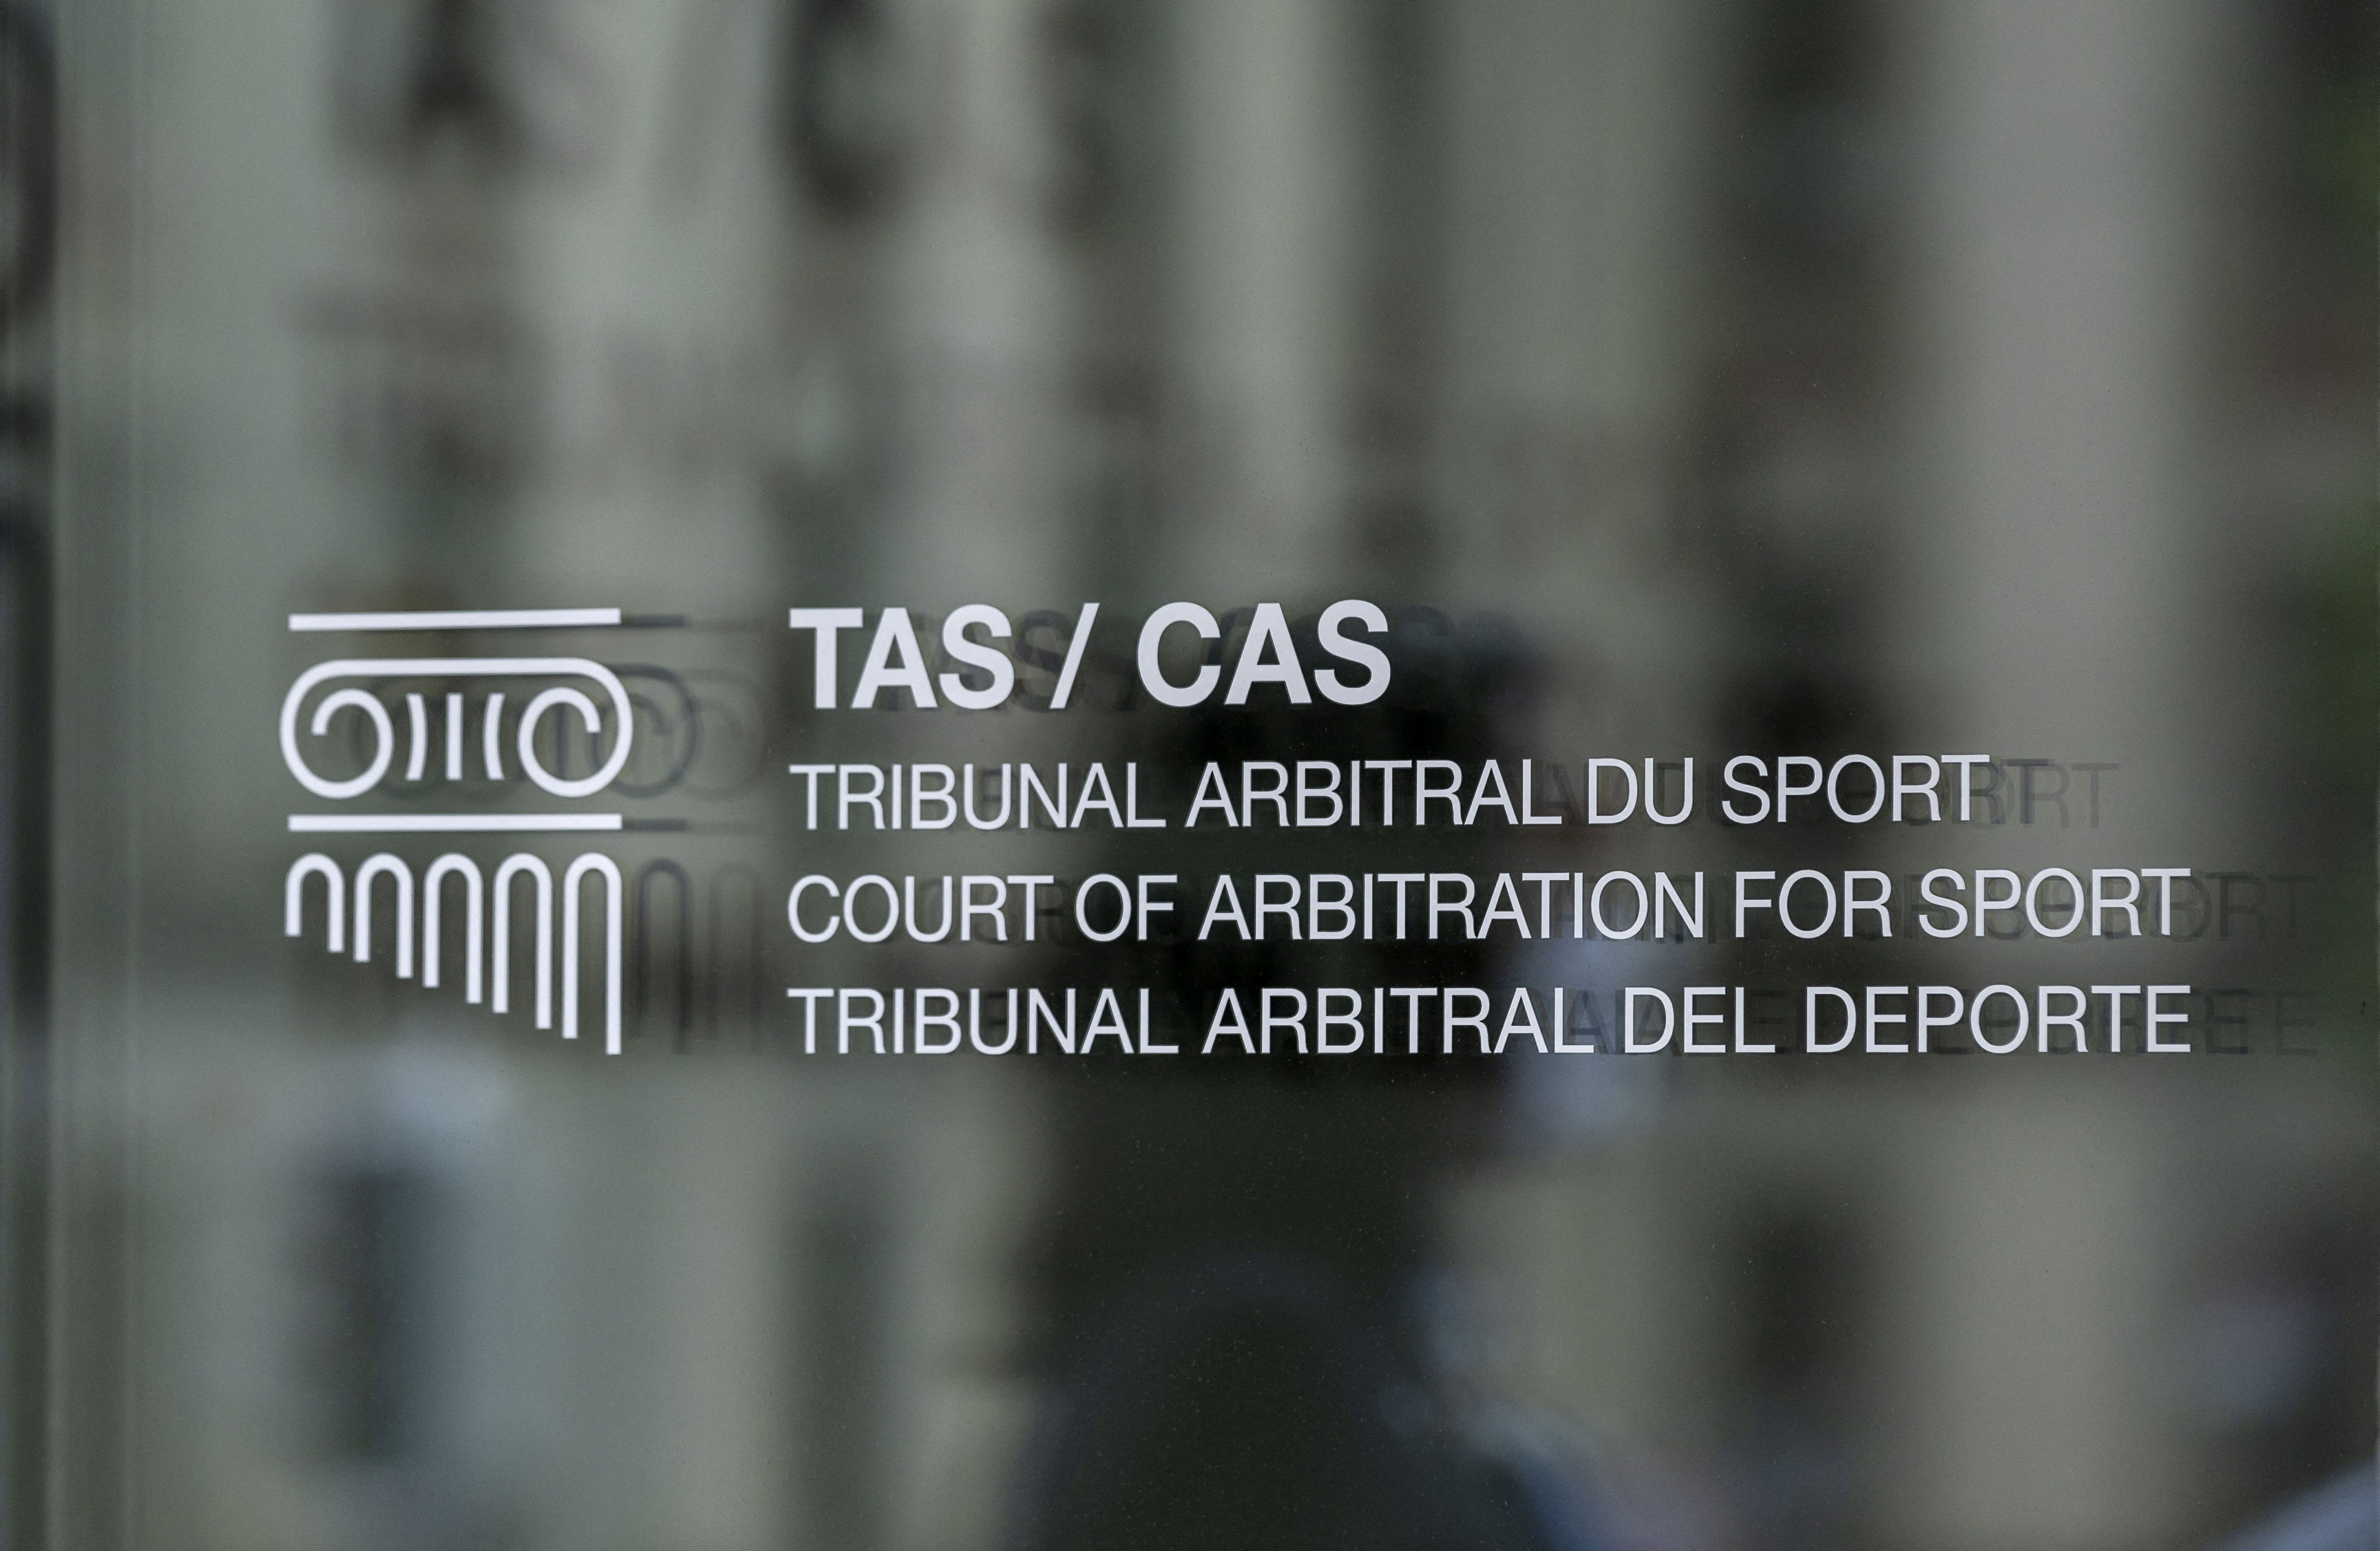 New headquarters for Court of Arbitration for Sport (CAS) in Lausanne